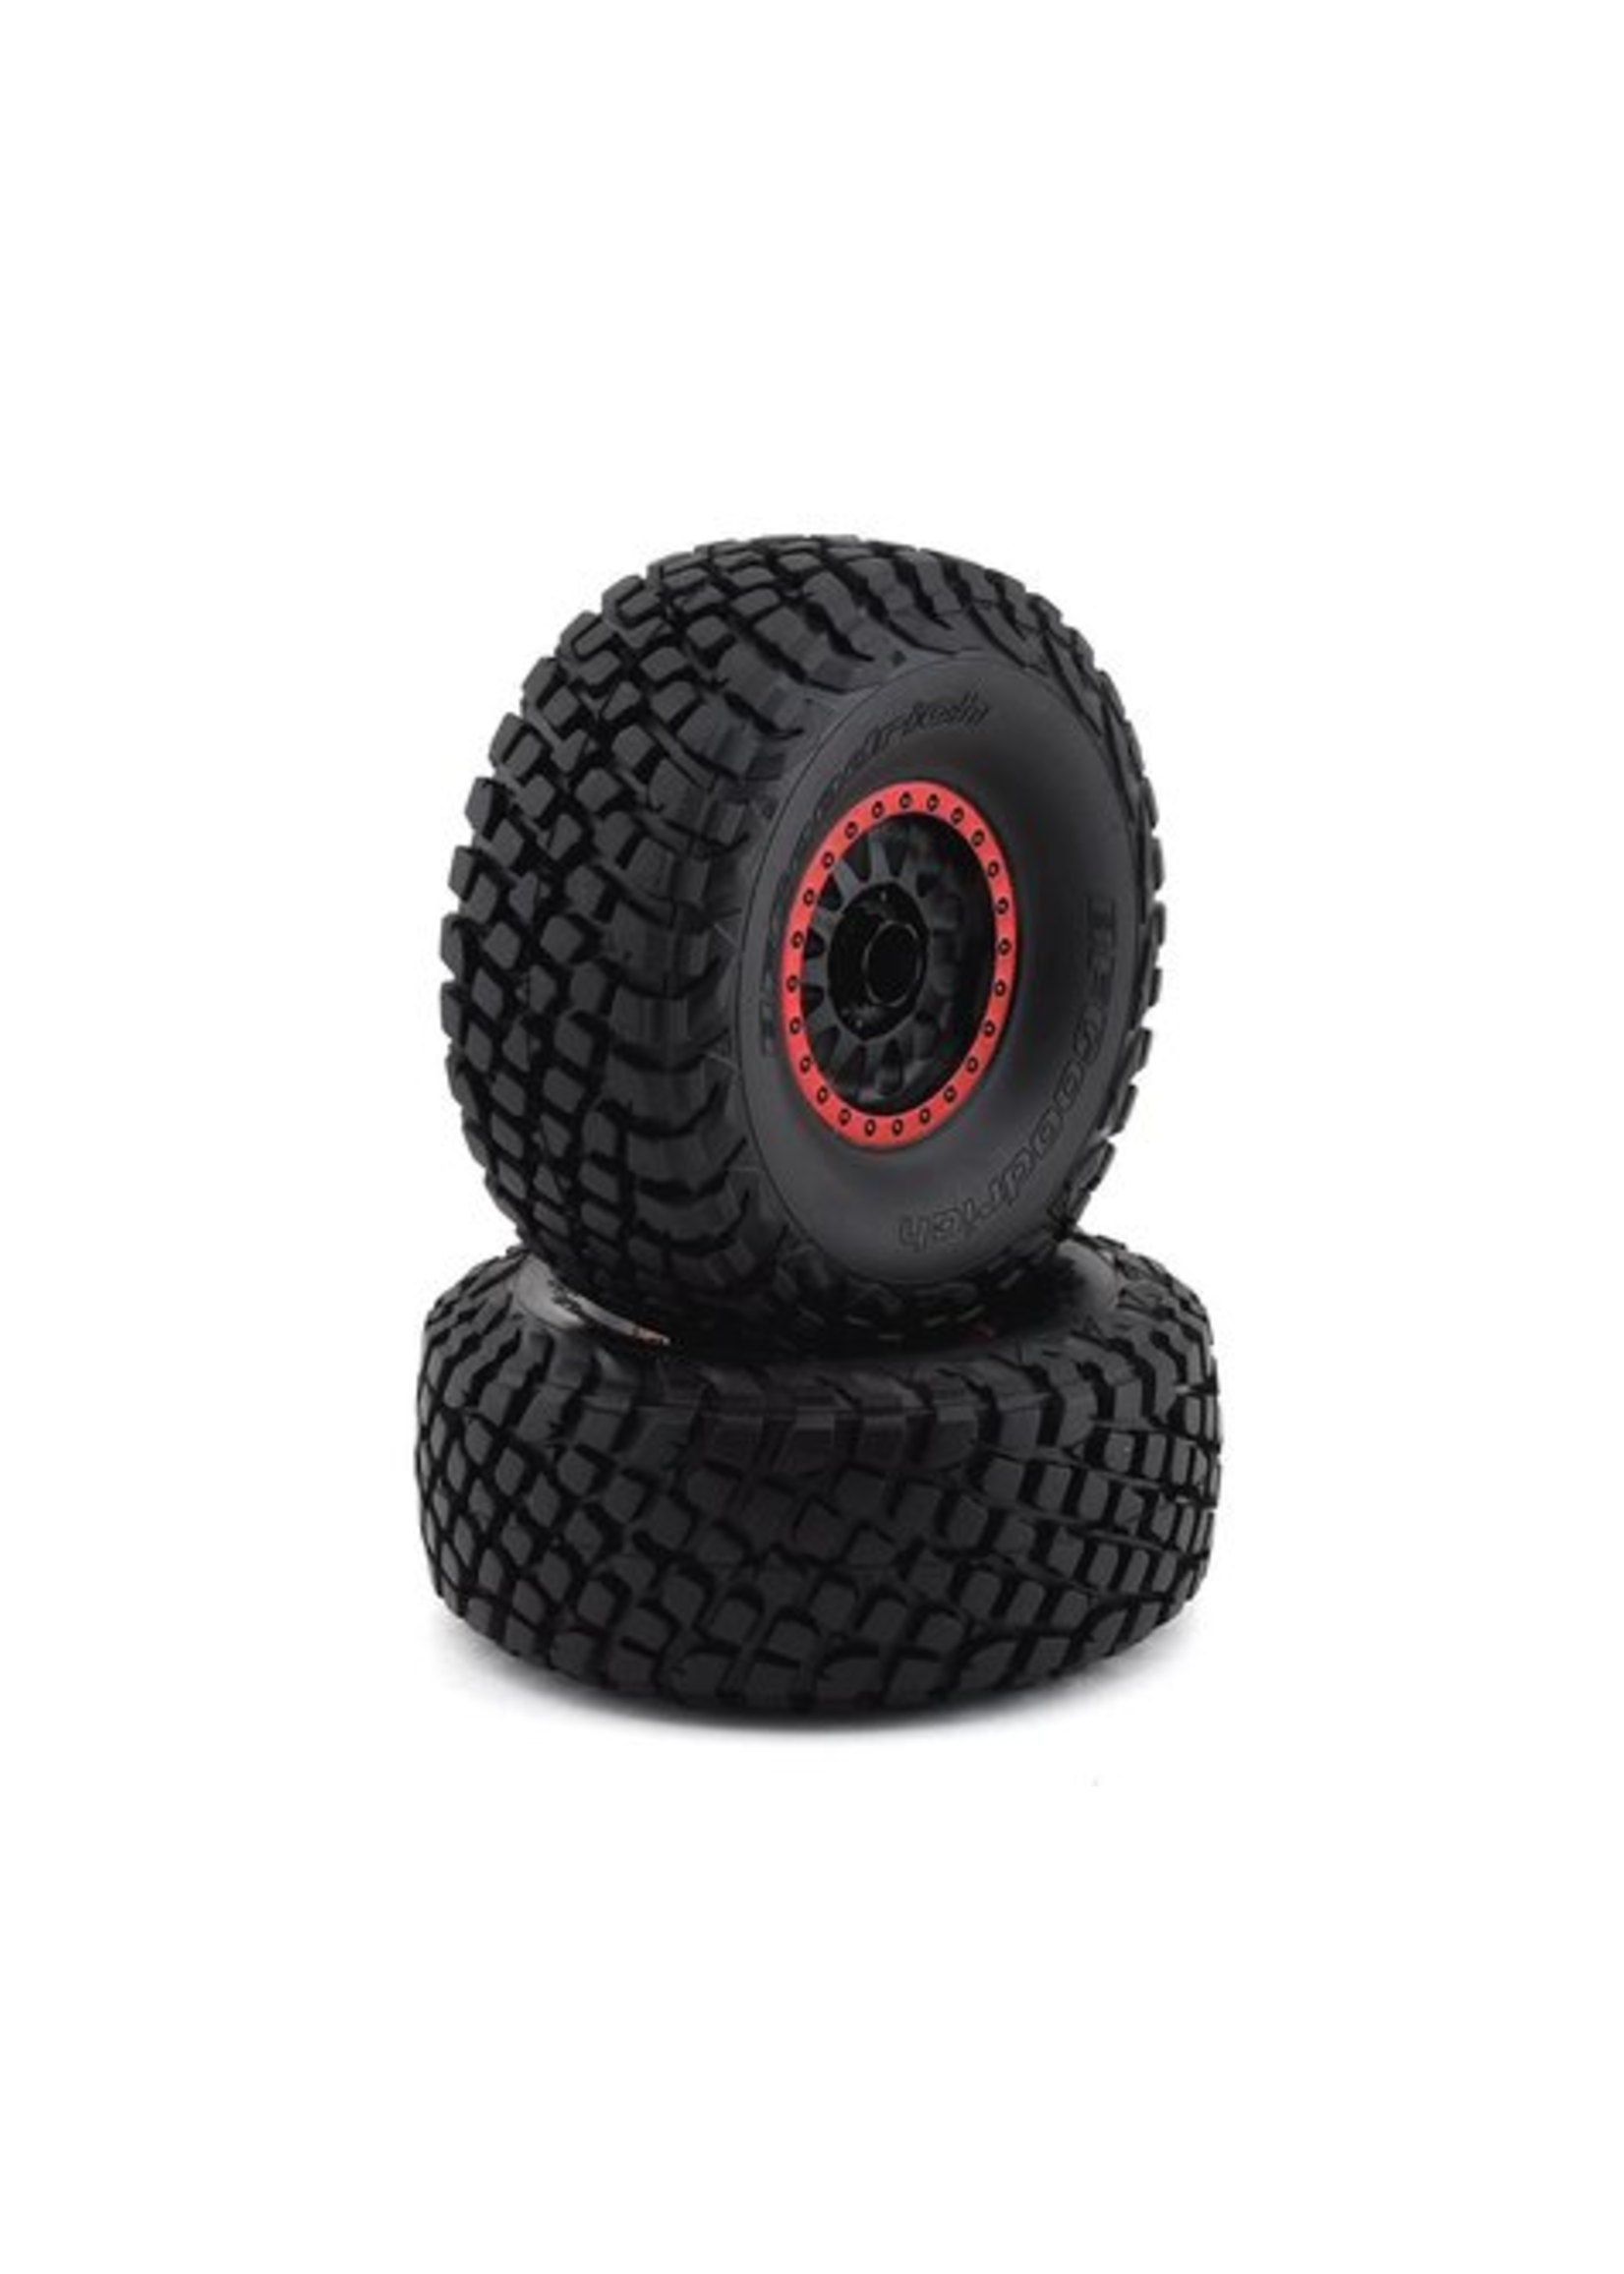 Traxxas TRA8474 Traxxas Tires and wheels, assembled, glued (Method Race Wheels, black with red beadlock, BFGoodrich Baja KR3 tires) (2)